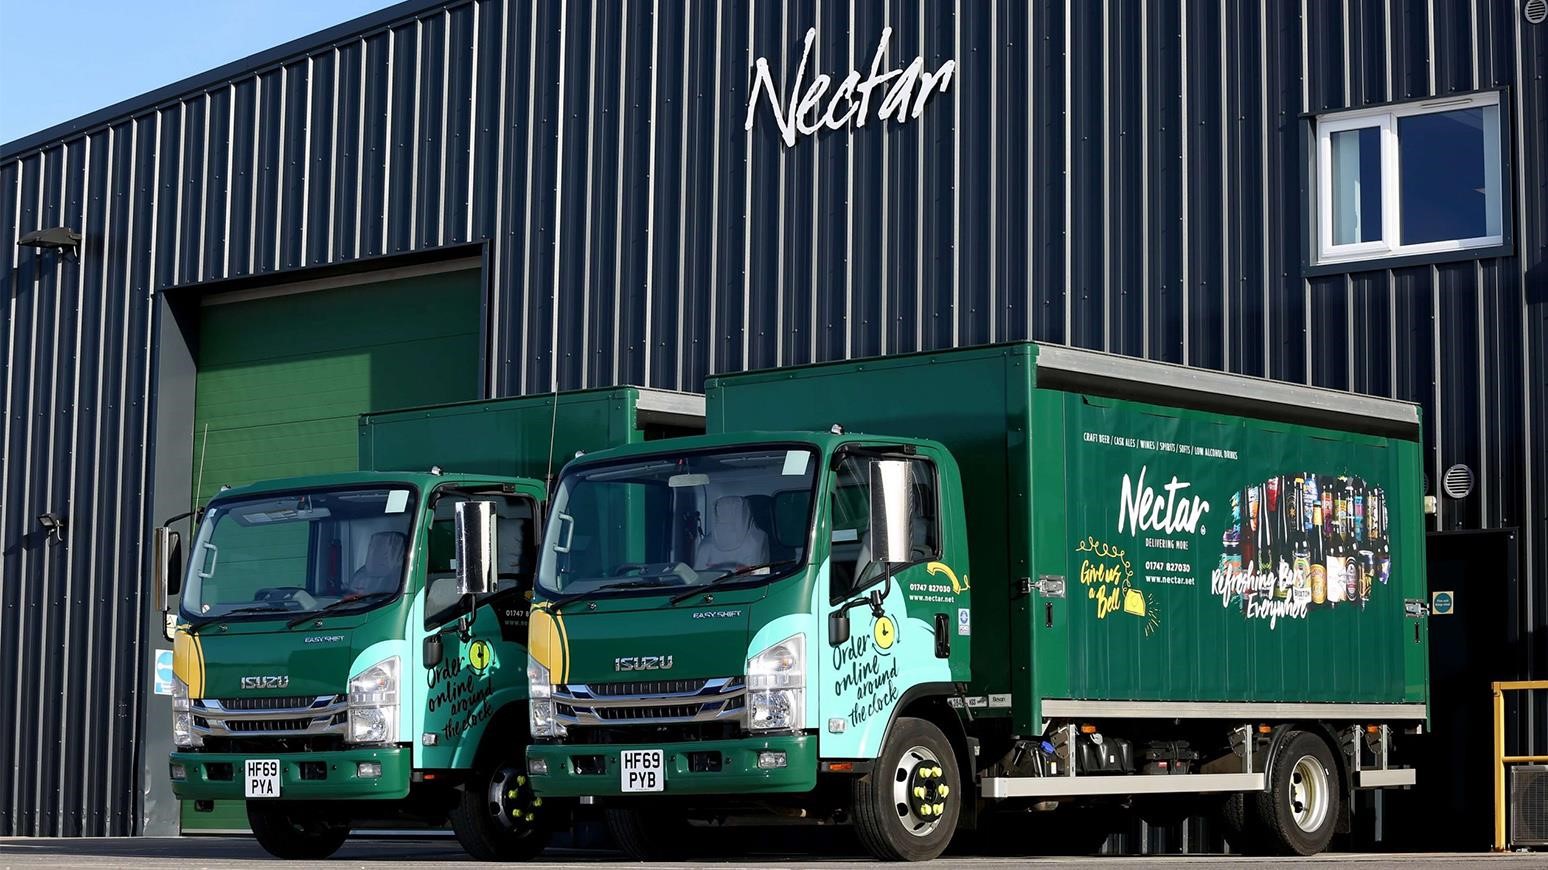 Five New Isuzu Trucks Help Nectar Imports To Deliver Strong & Soft Drinks